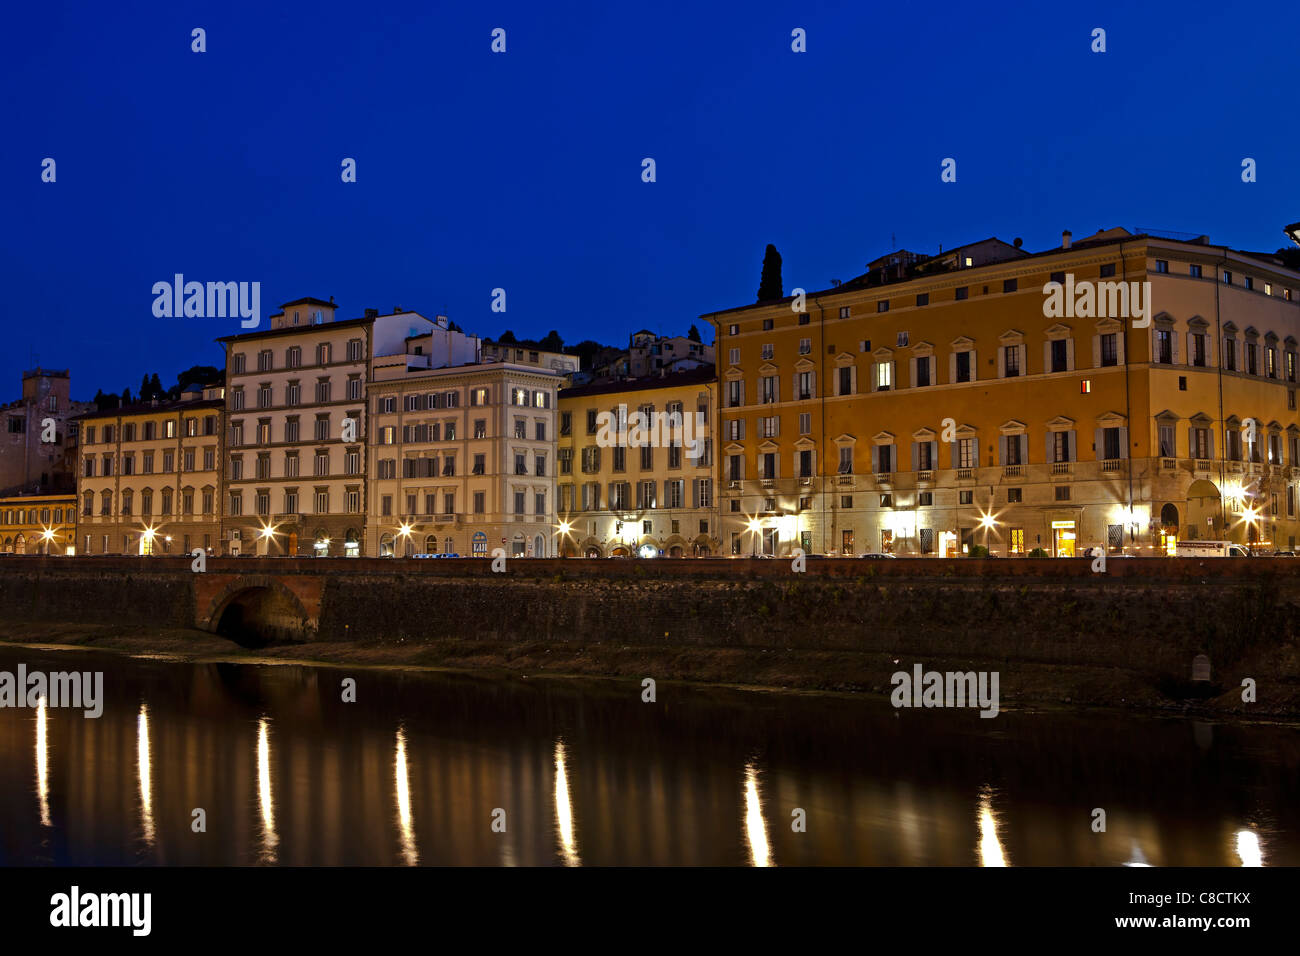 Outlook for the night by the banks of the Arno in Florence Stock Photo